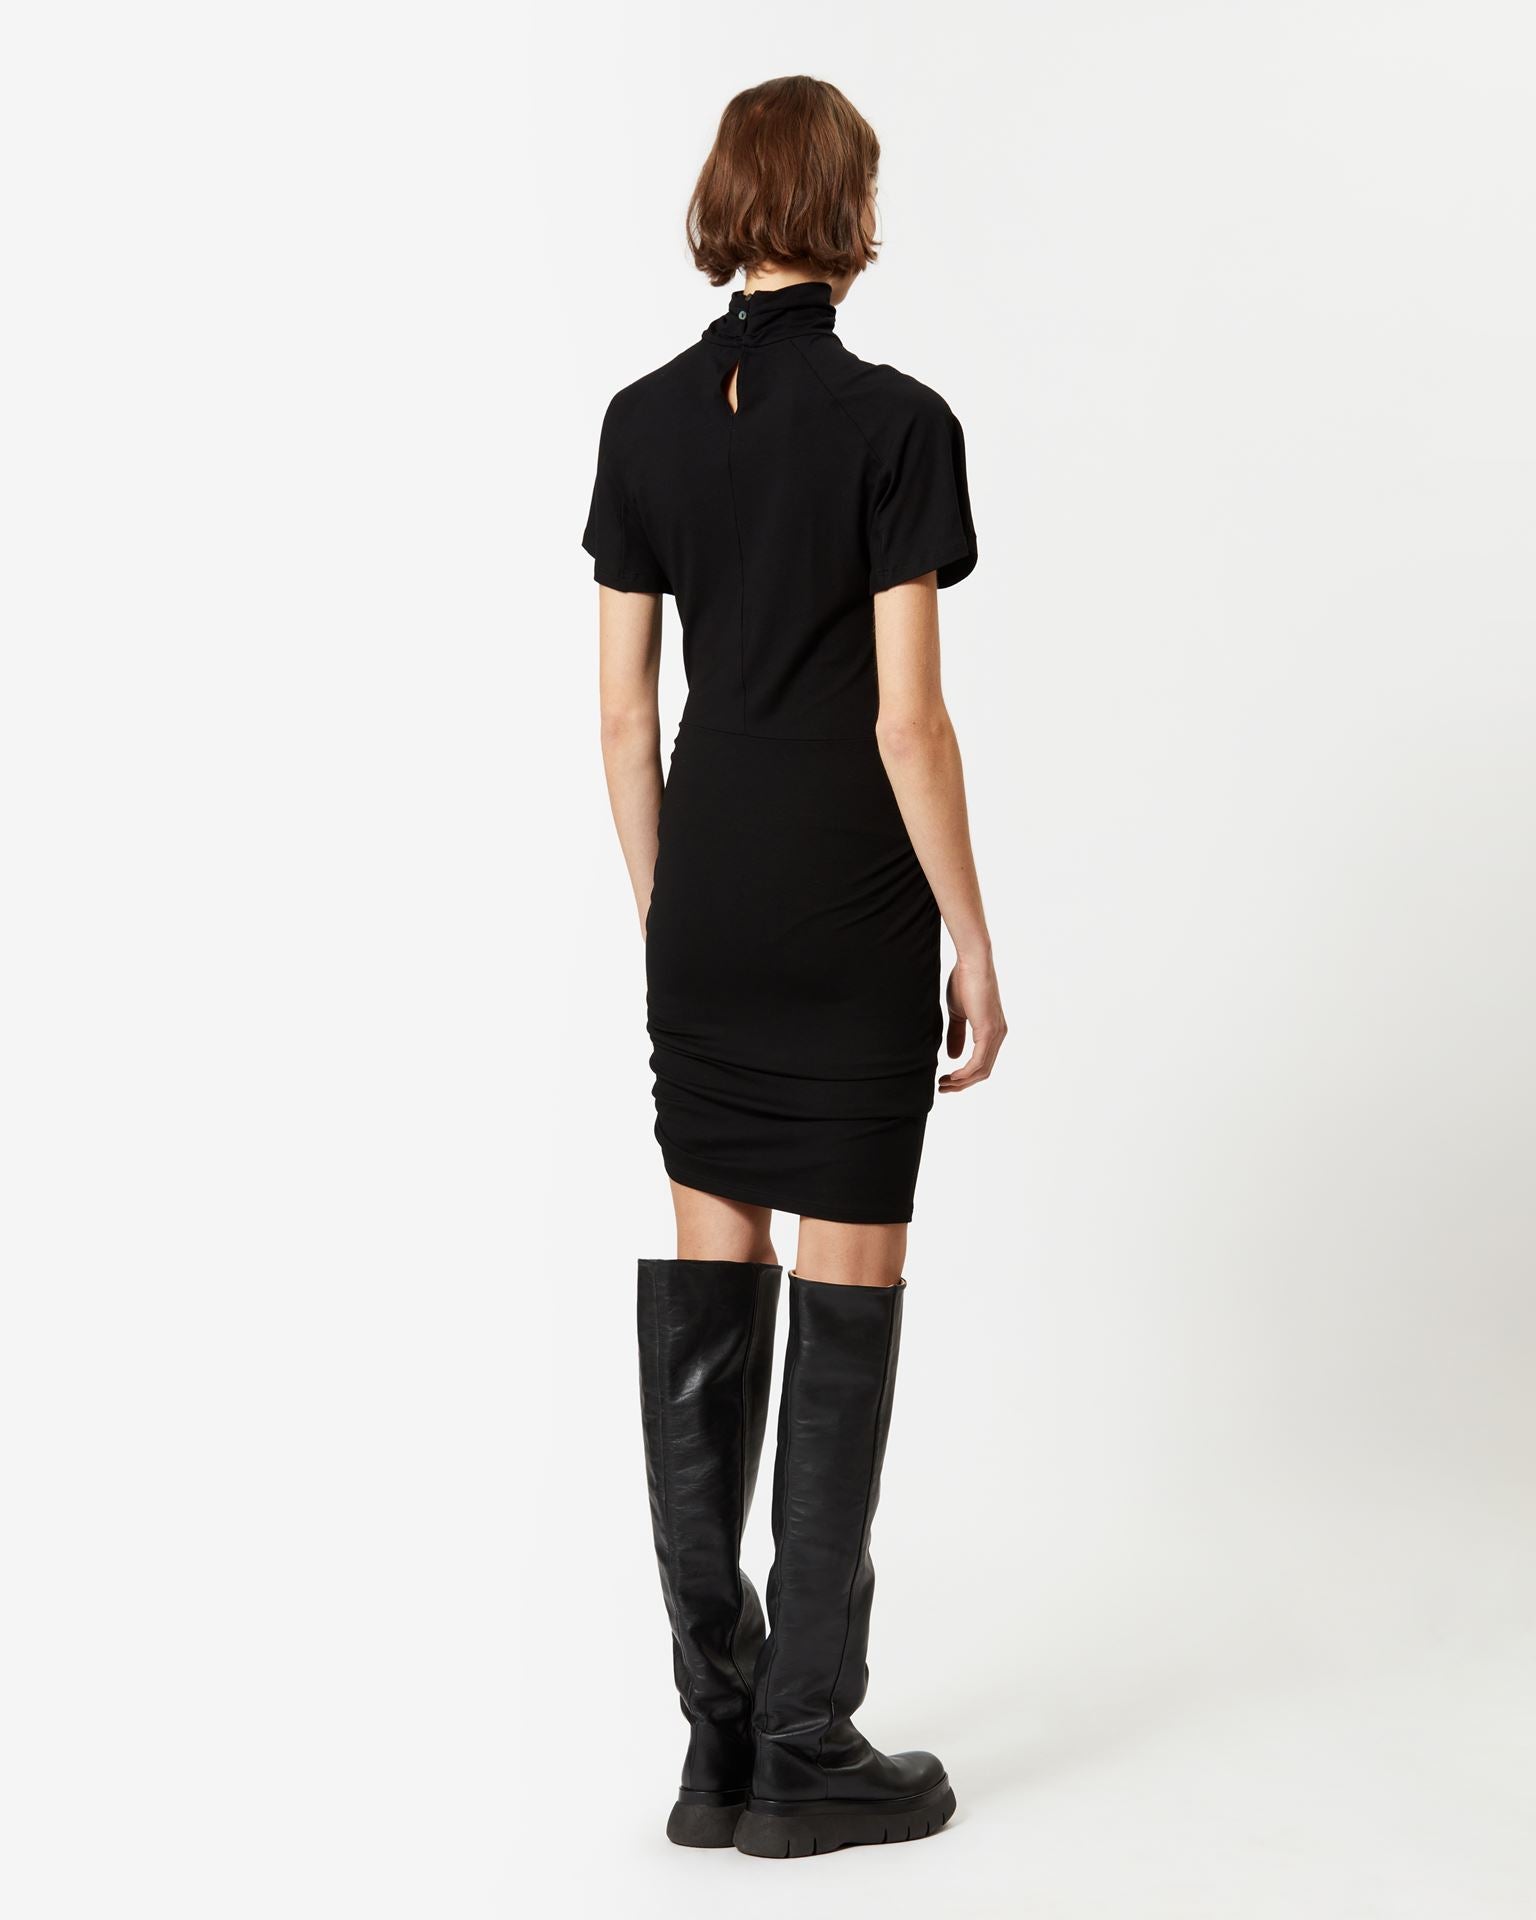 The Isabel Marant Lya Dress in Black available at The New Trend Australia